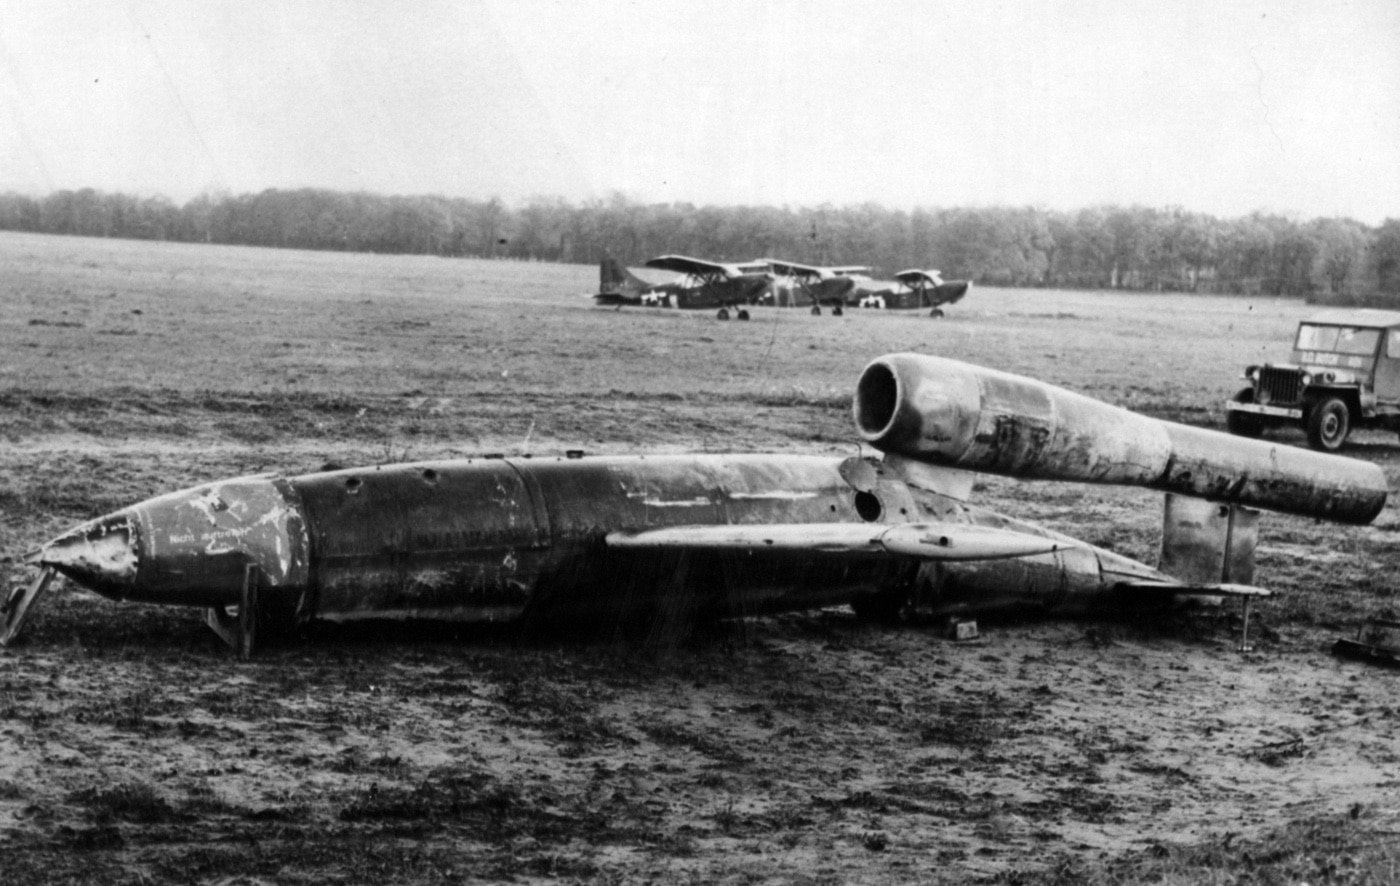 v-1 buzz bomb brought down in france 1944